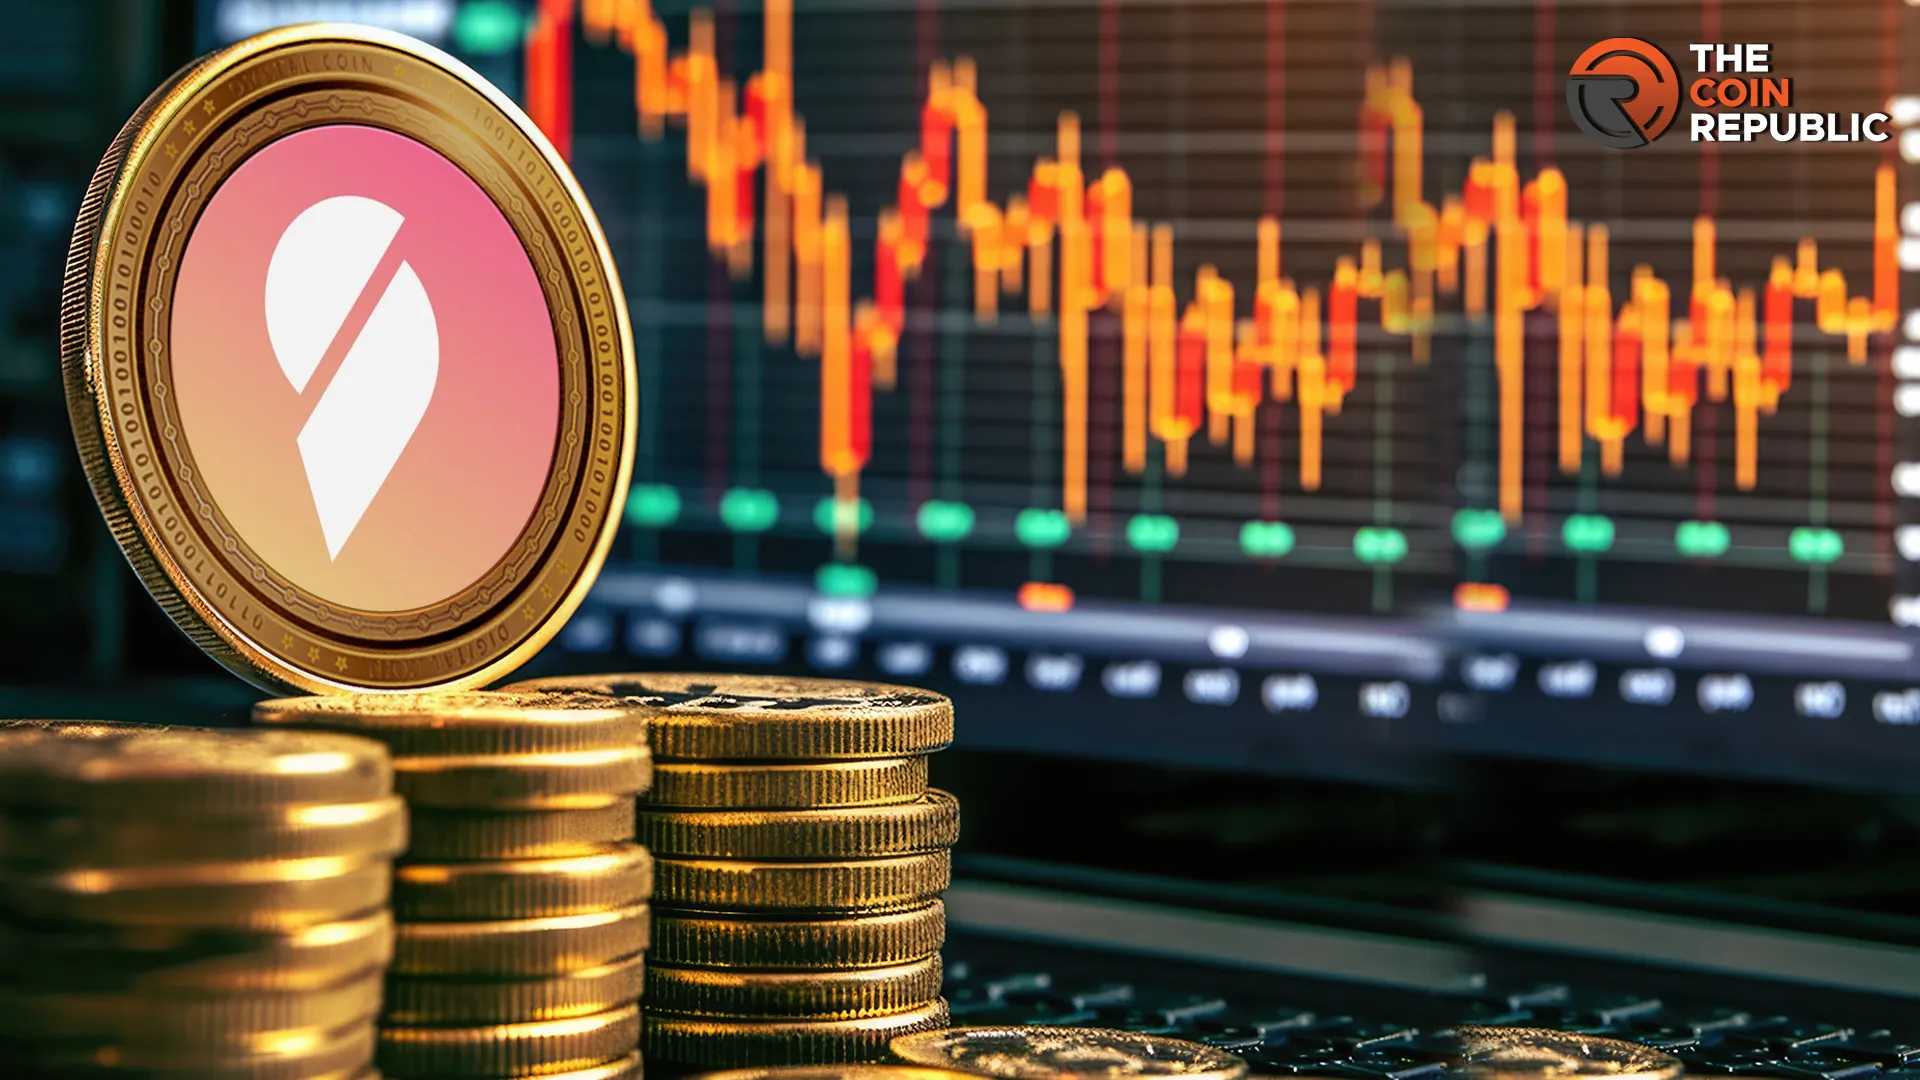 Prom Price Analysis: What Is The Next Move For The Crypto?